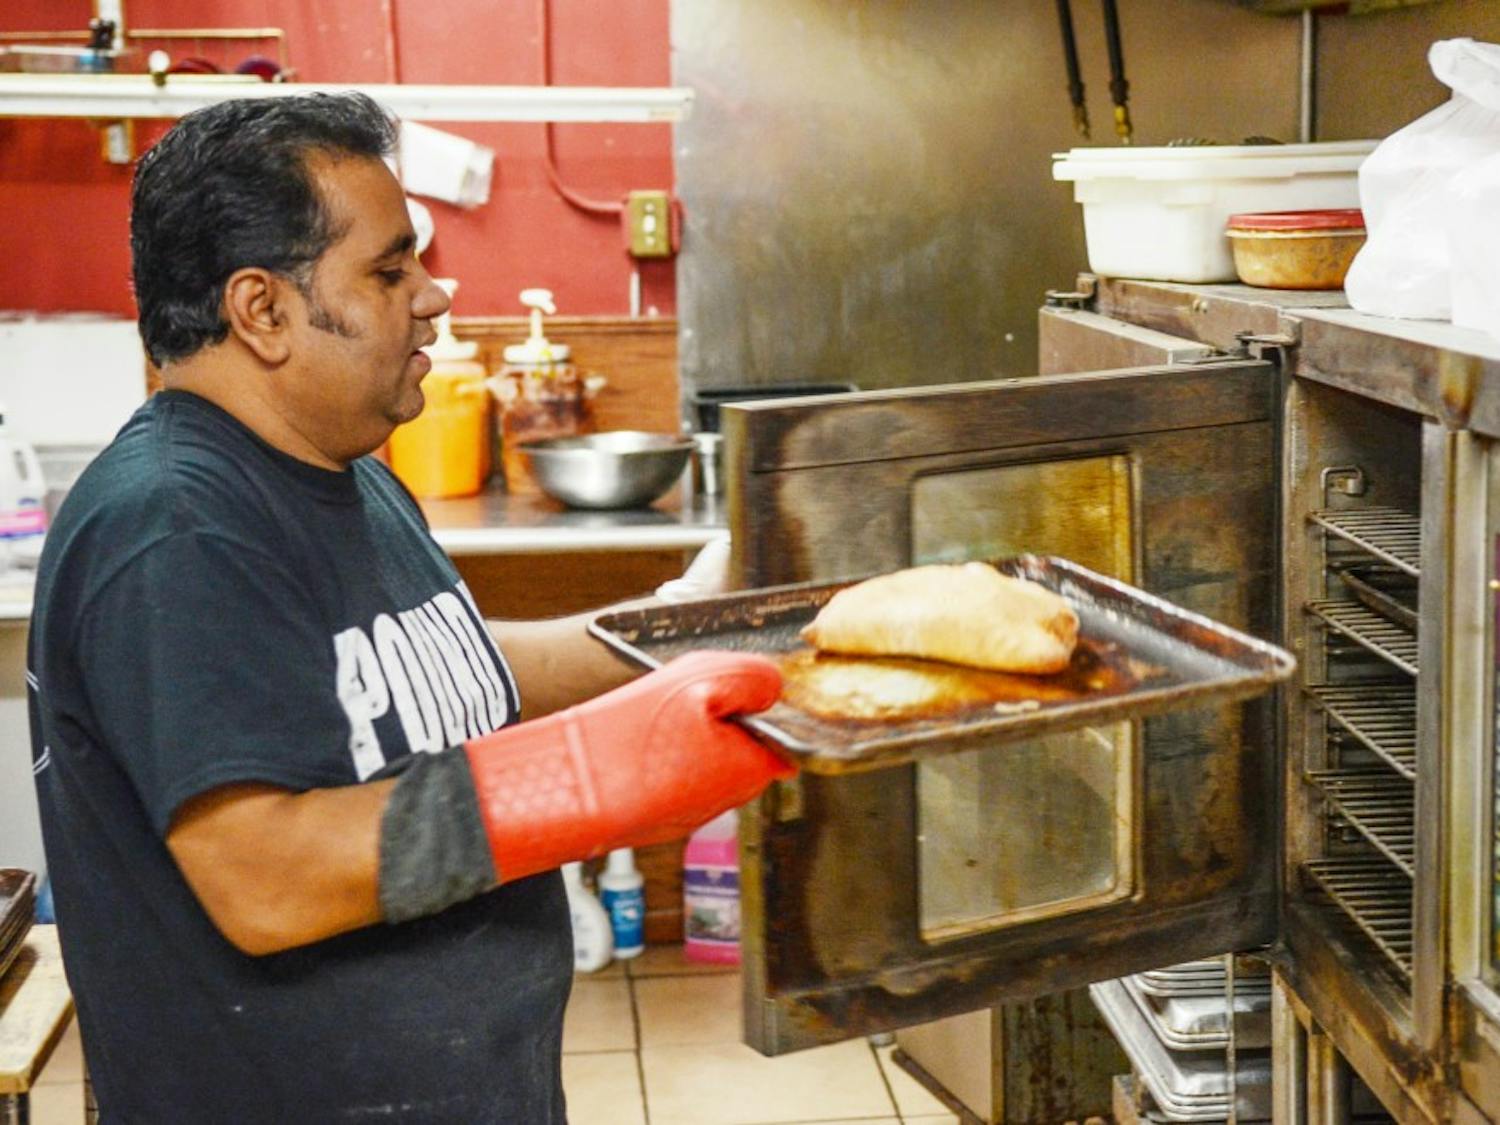 MD B Ali, owner of Calios, takes a calzone out of the oven at the Main Street location. Calios provides those looking for food around South Campus with a variety of calzones, including dessert-style.